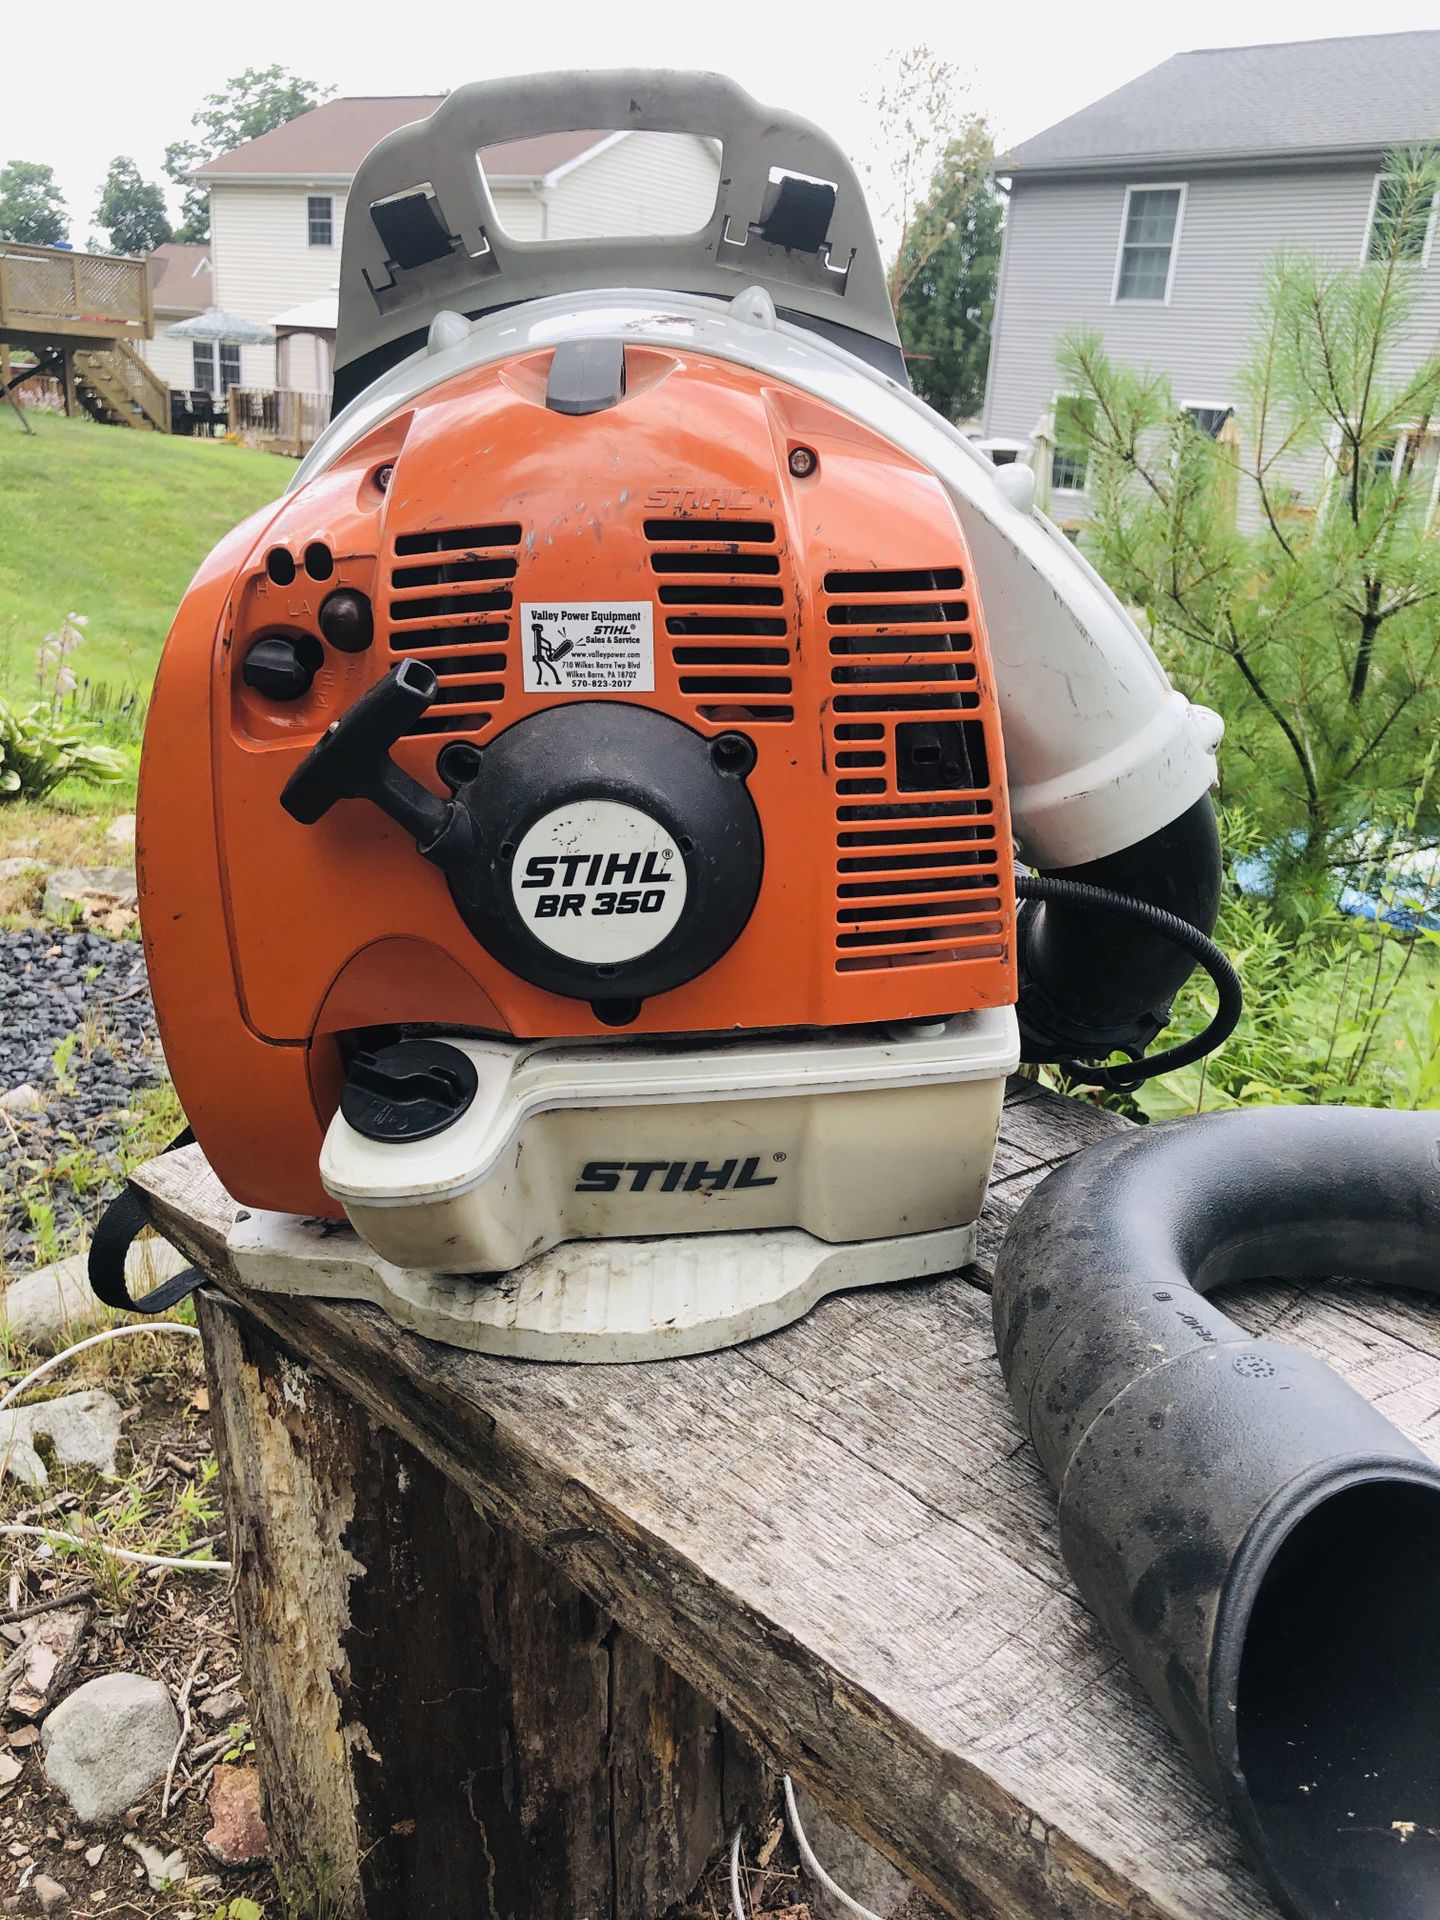 Stihl BR350 backpack blower with attachments